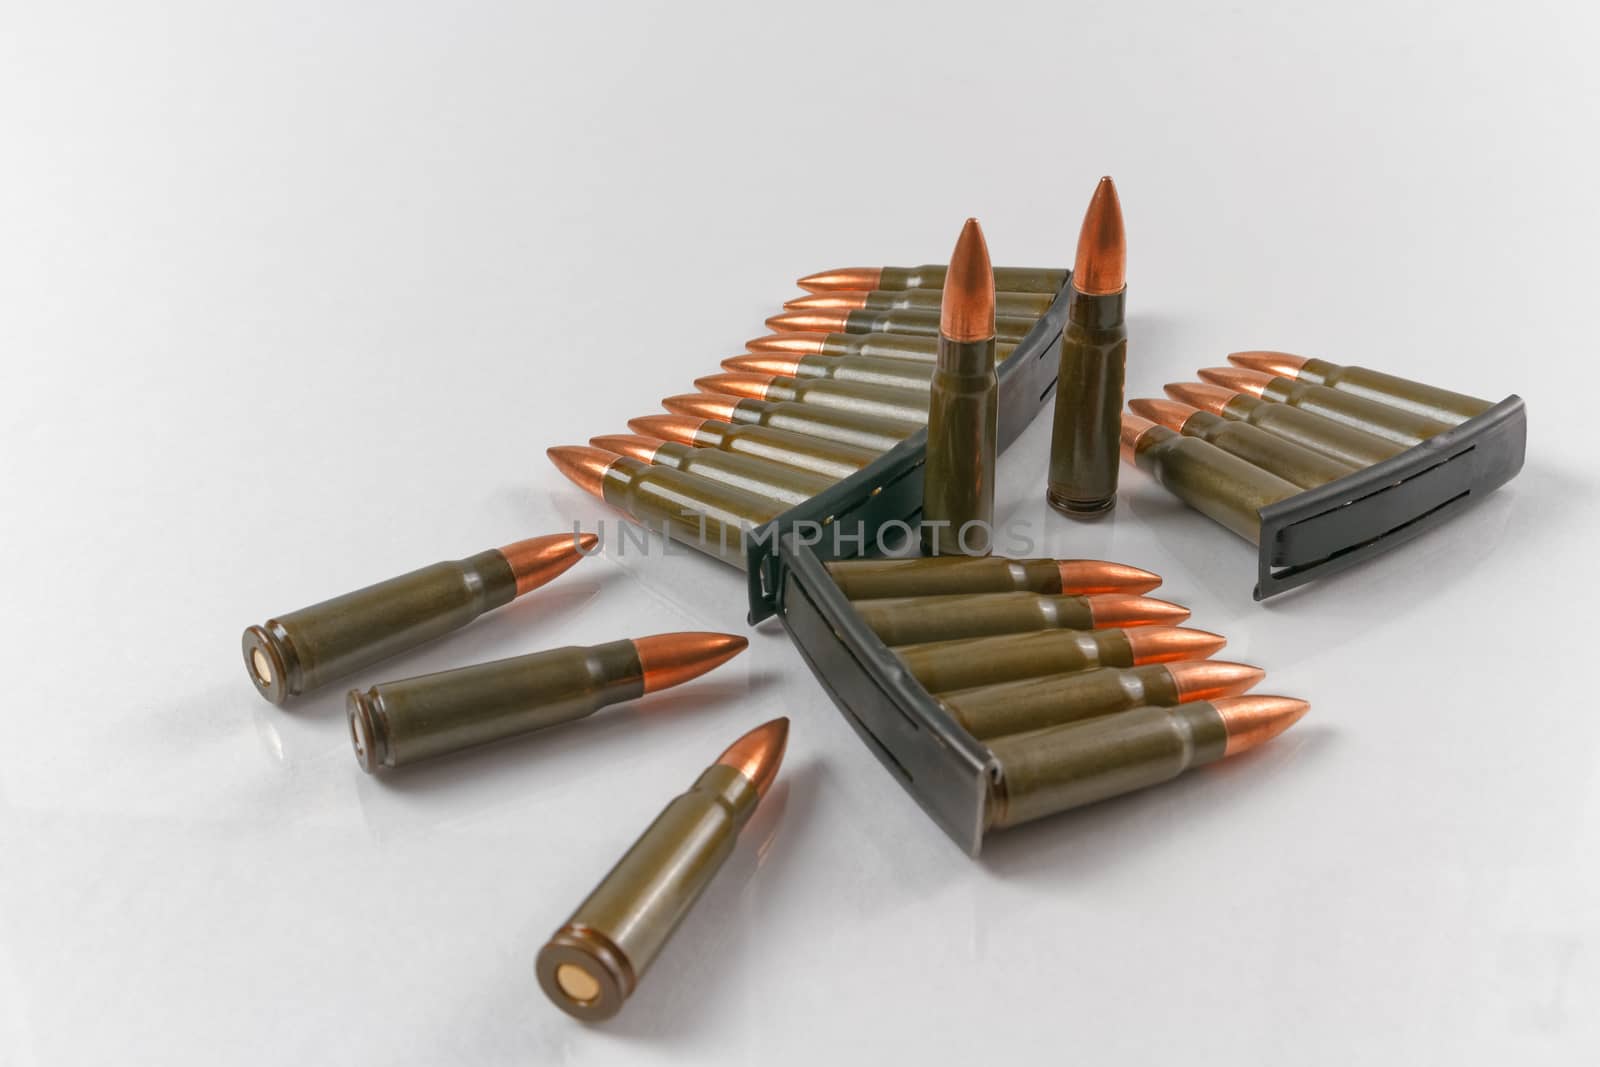 7.62x39 full metal jacket target shooting rifle cartridges with speed loader stripper clips